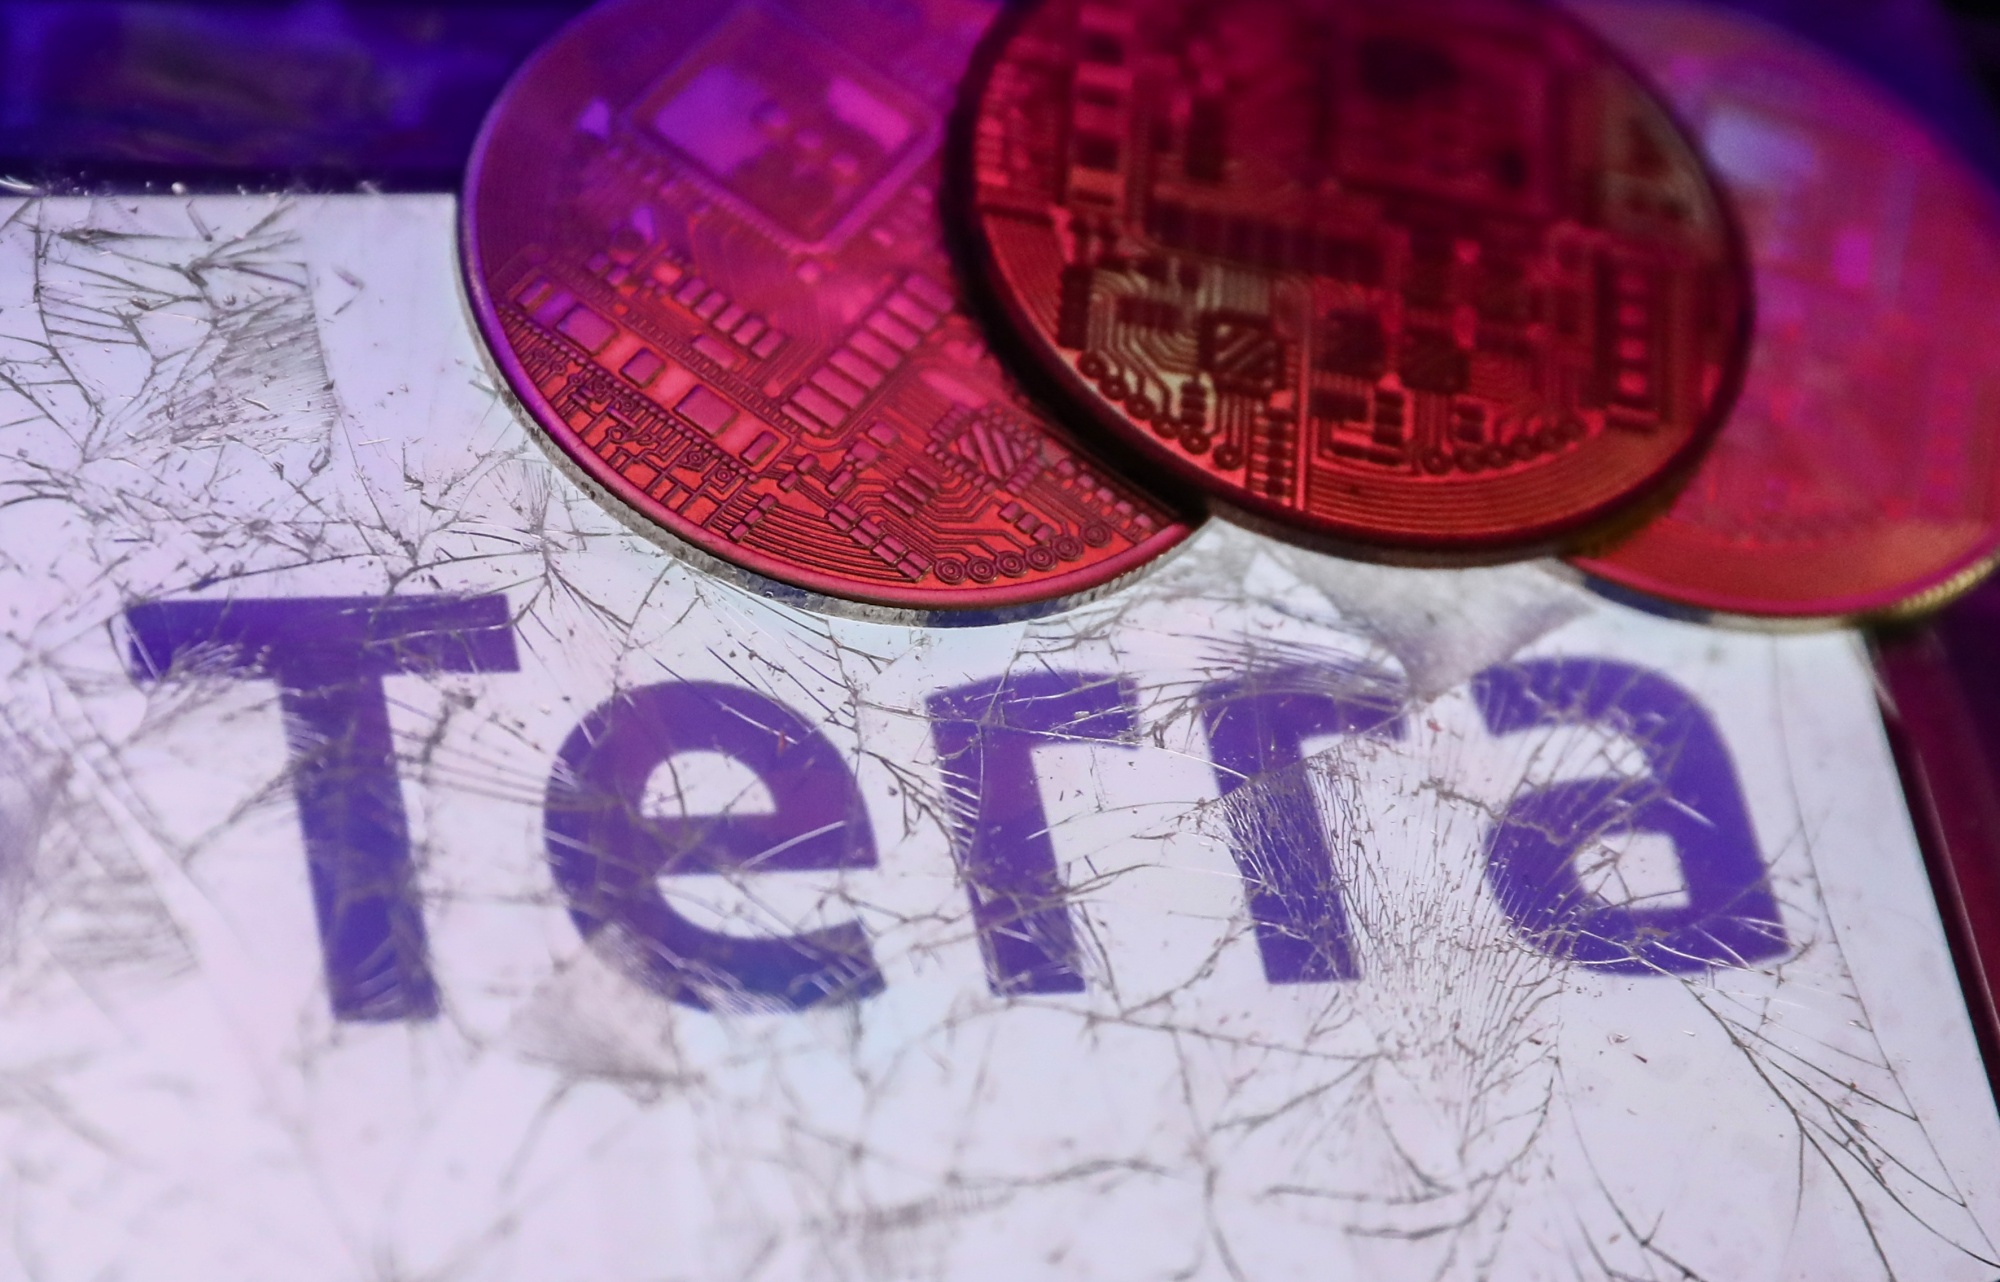 High-profile algorithmic stablecoins may end up being the main casualty from Terra’s collapse.